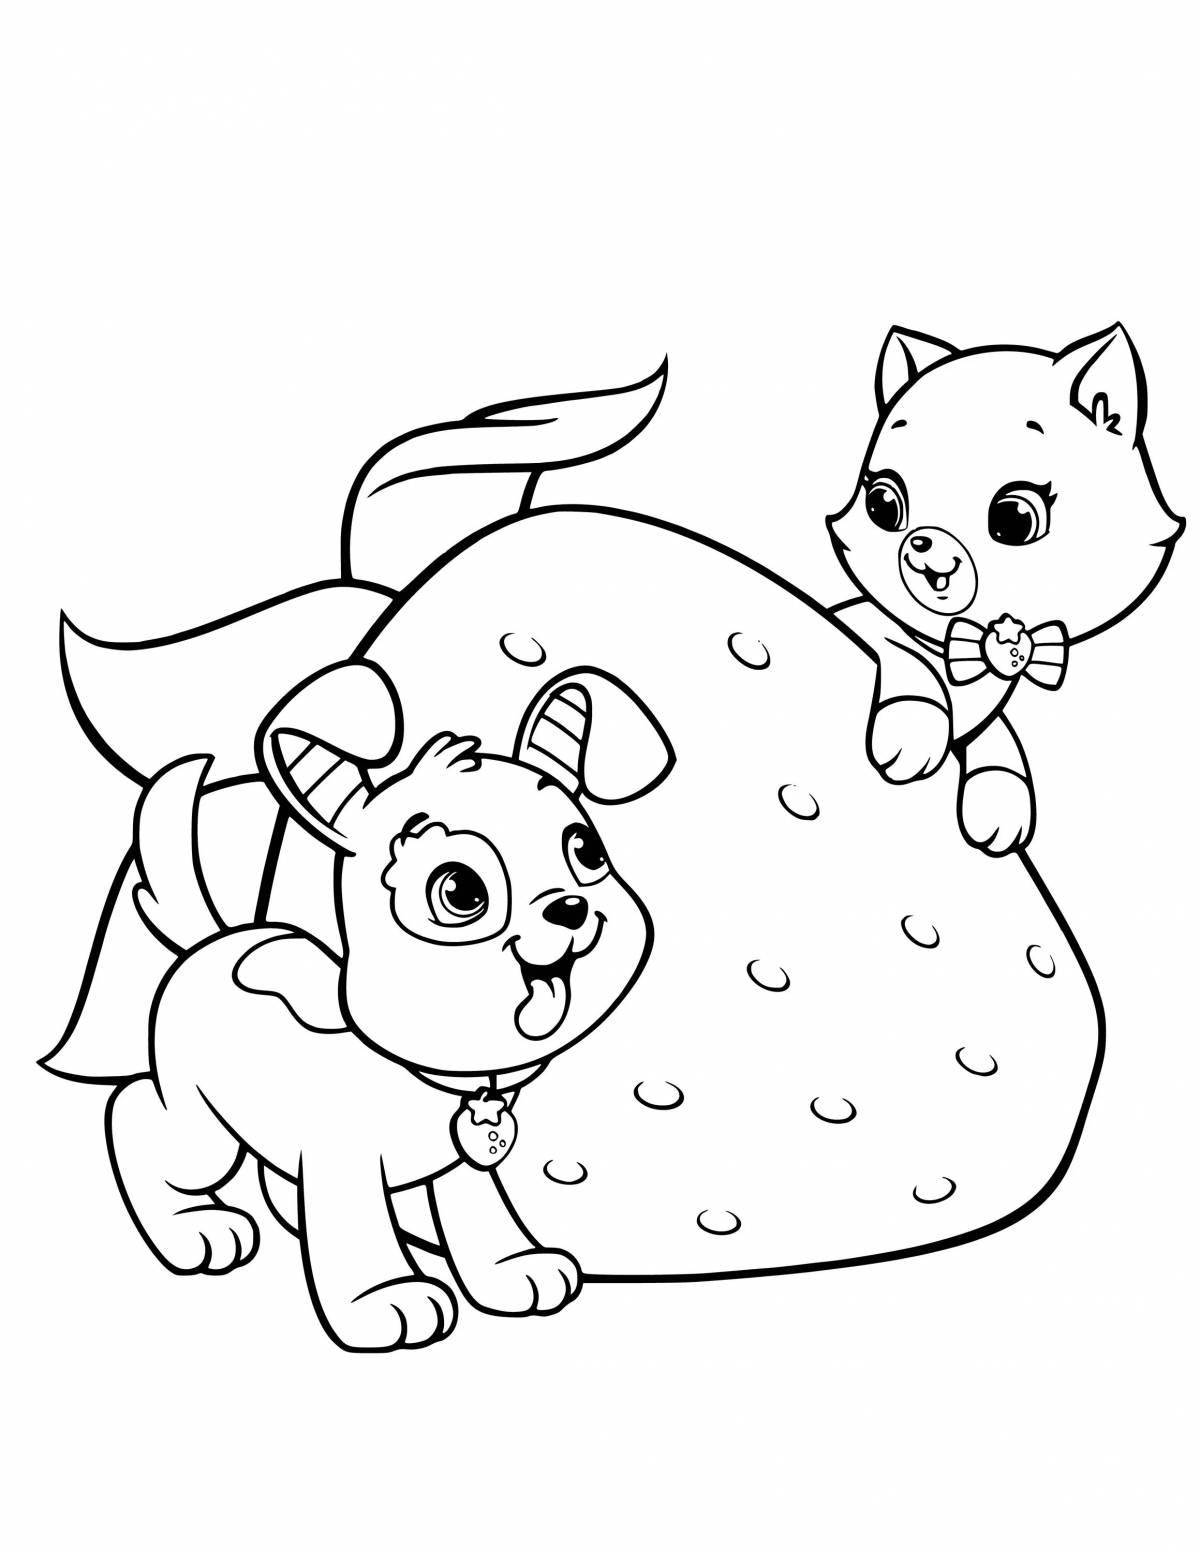 Cute kitten and dog coloring book